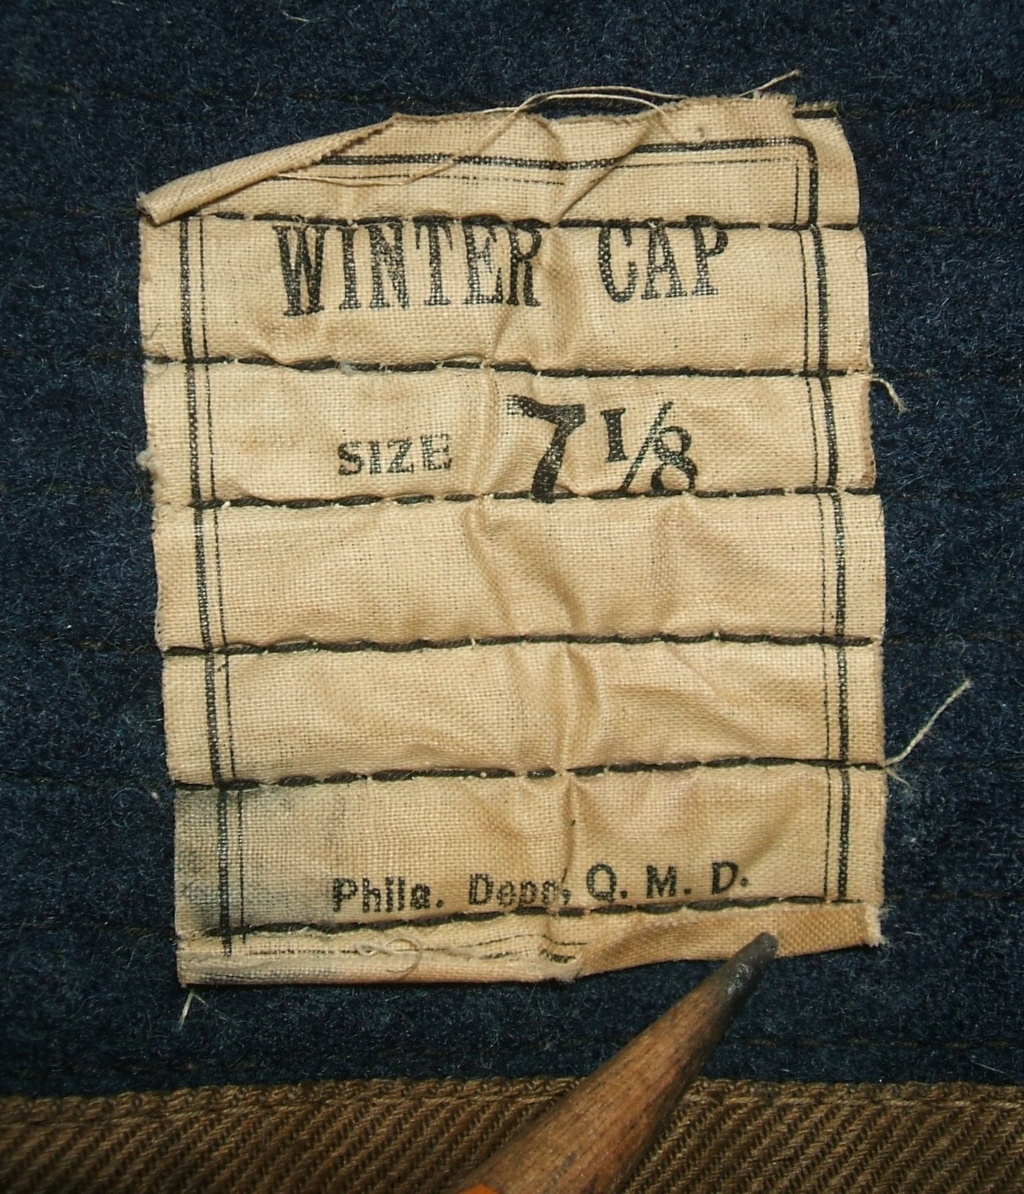 Help identifying a US Army cold weather cap from Interwar Period (1919-1940) Winter11